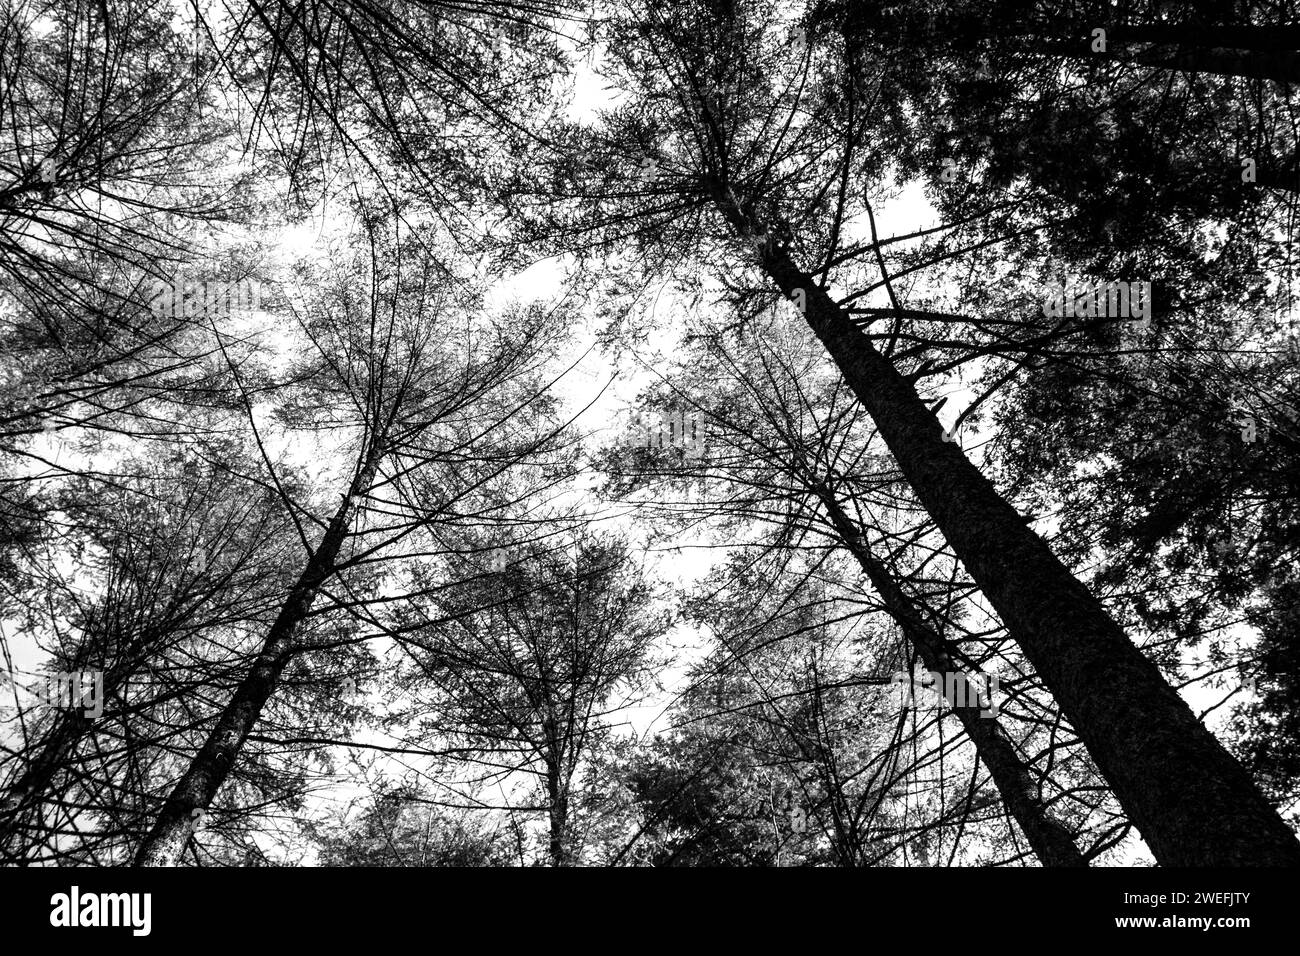 Looking up into the tree tops of pine trees in a forest at Balhama in Scotland, on a clear sunny day. Stock Photo